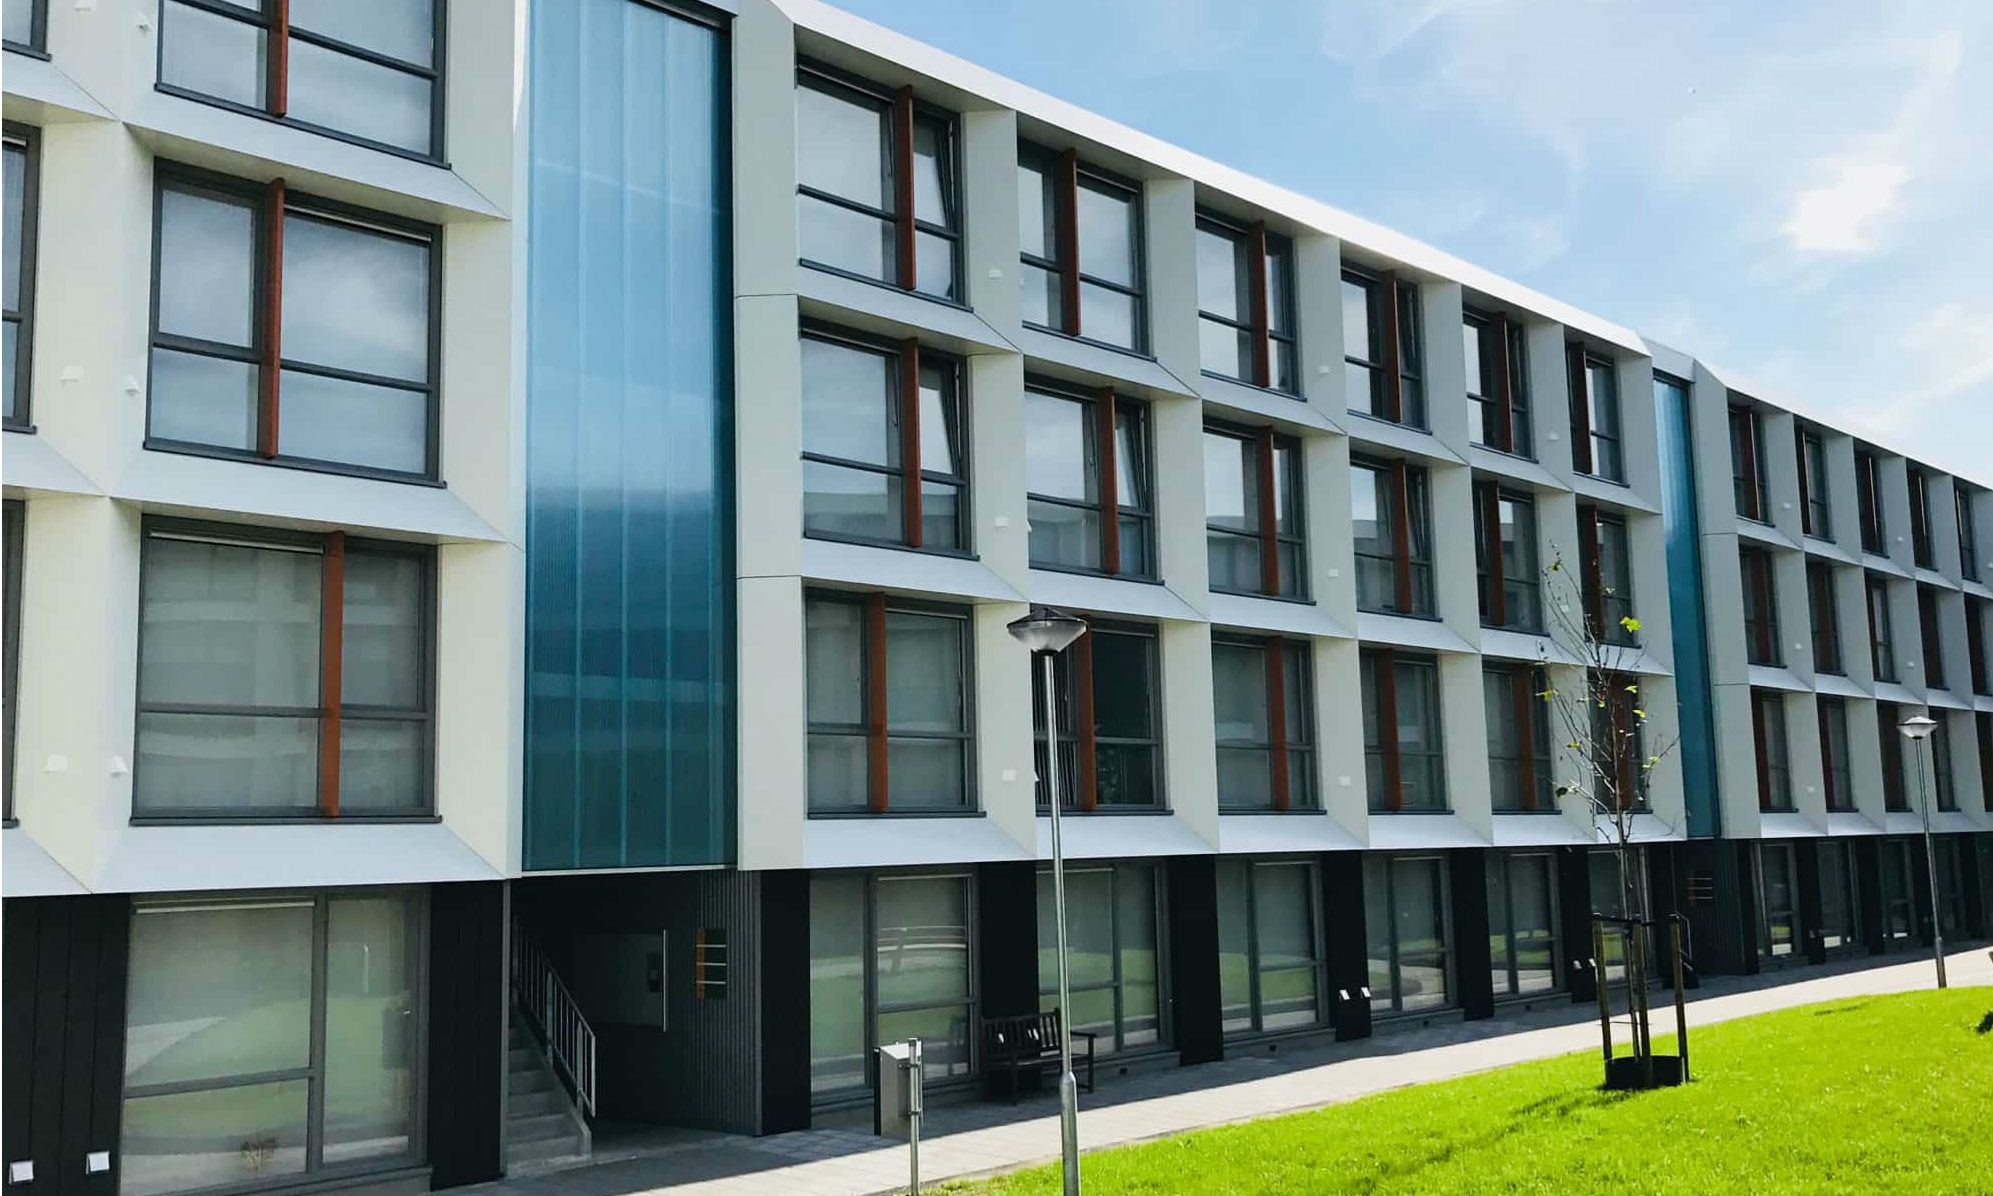 Net2 Entry Touch Panel with Net2 Secures new student accommodation complex